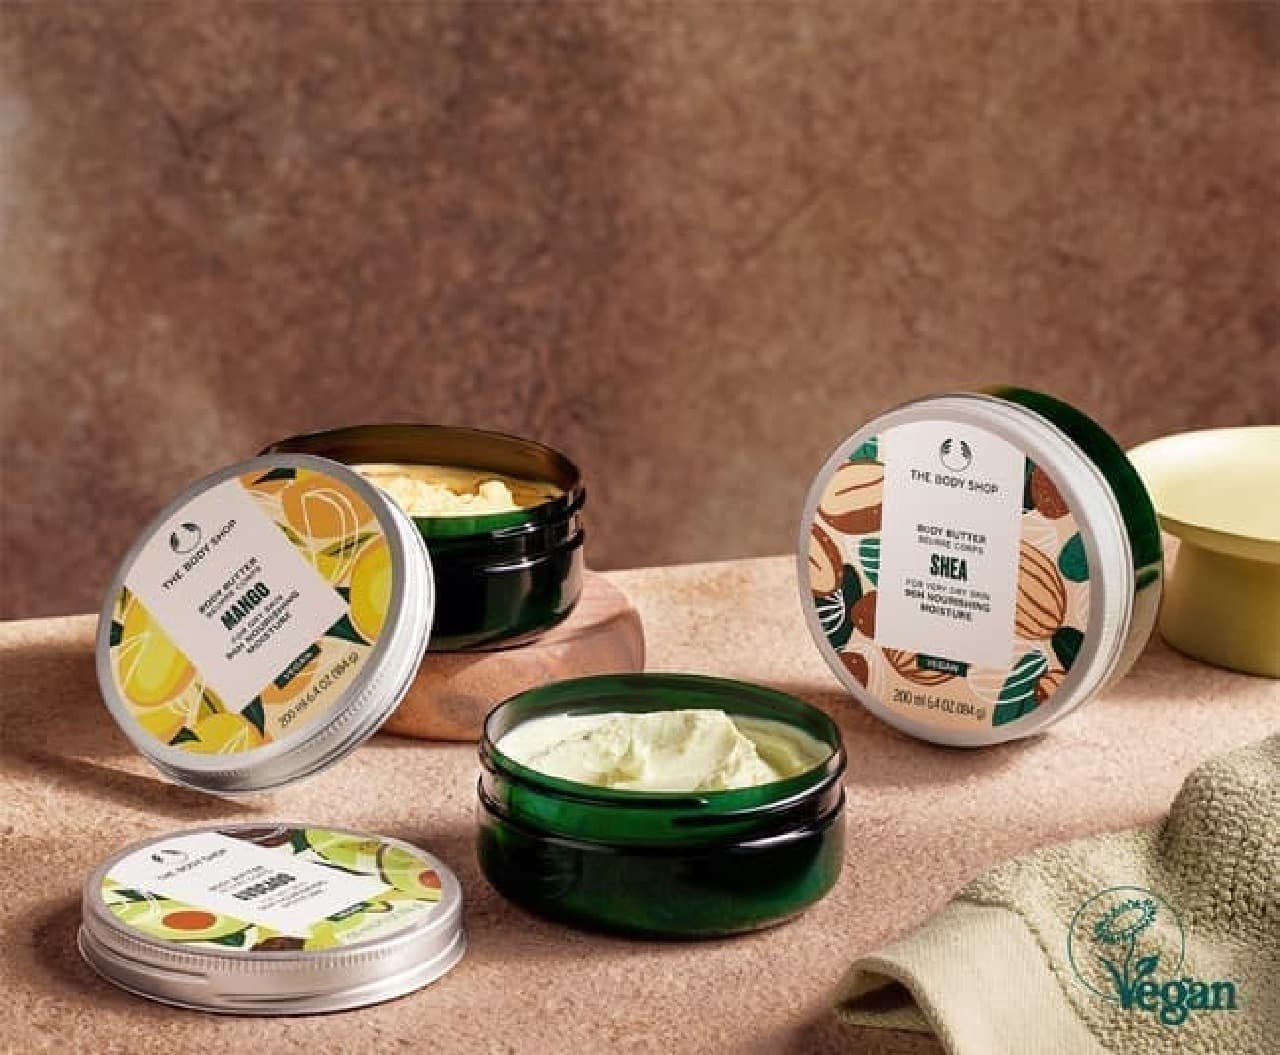 The Body Shop "Body Butter"